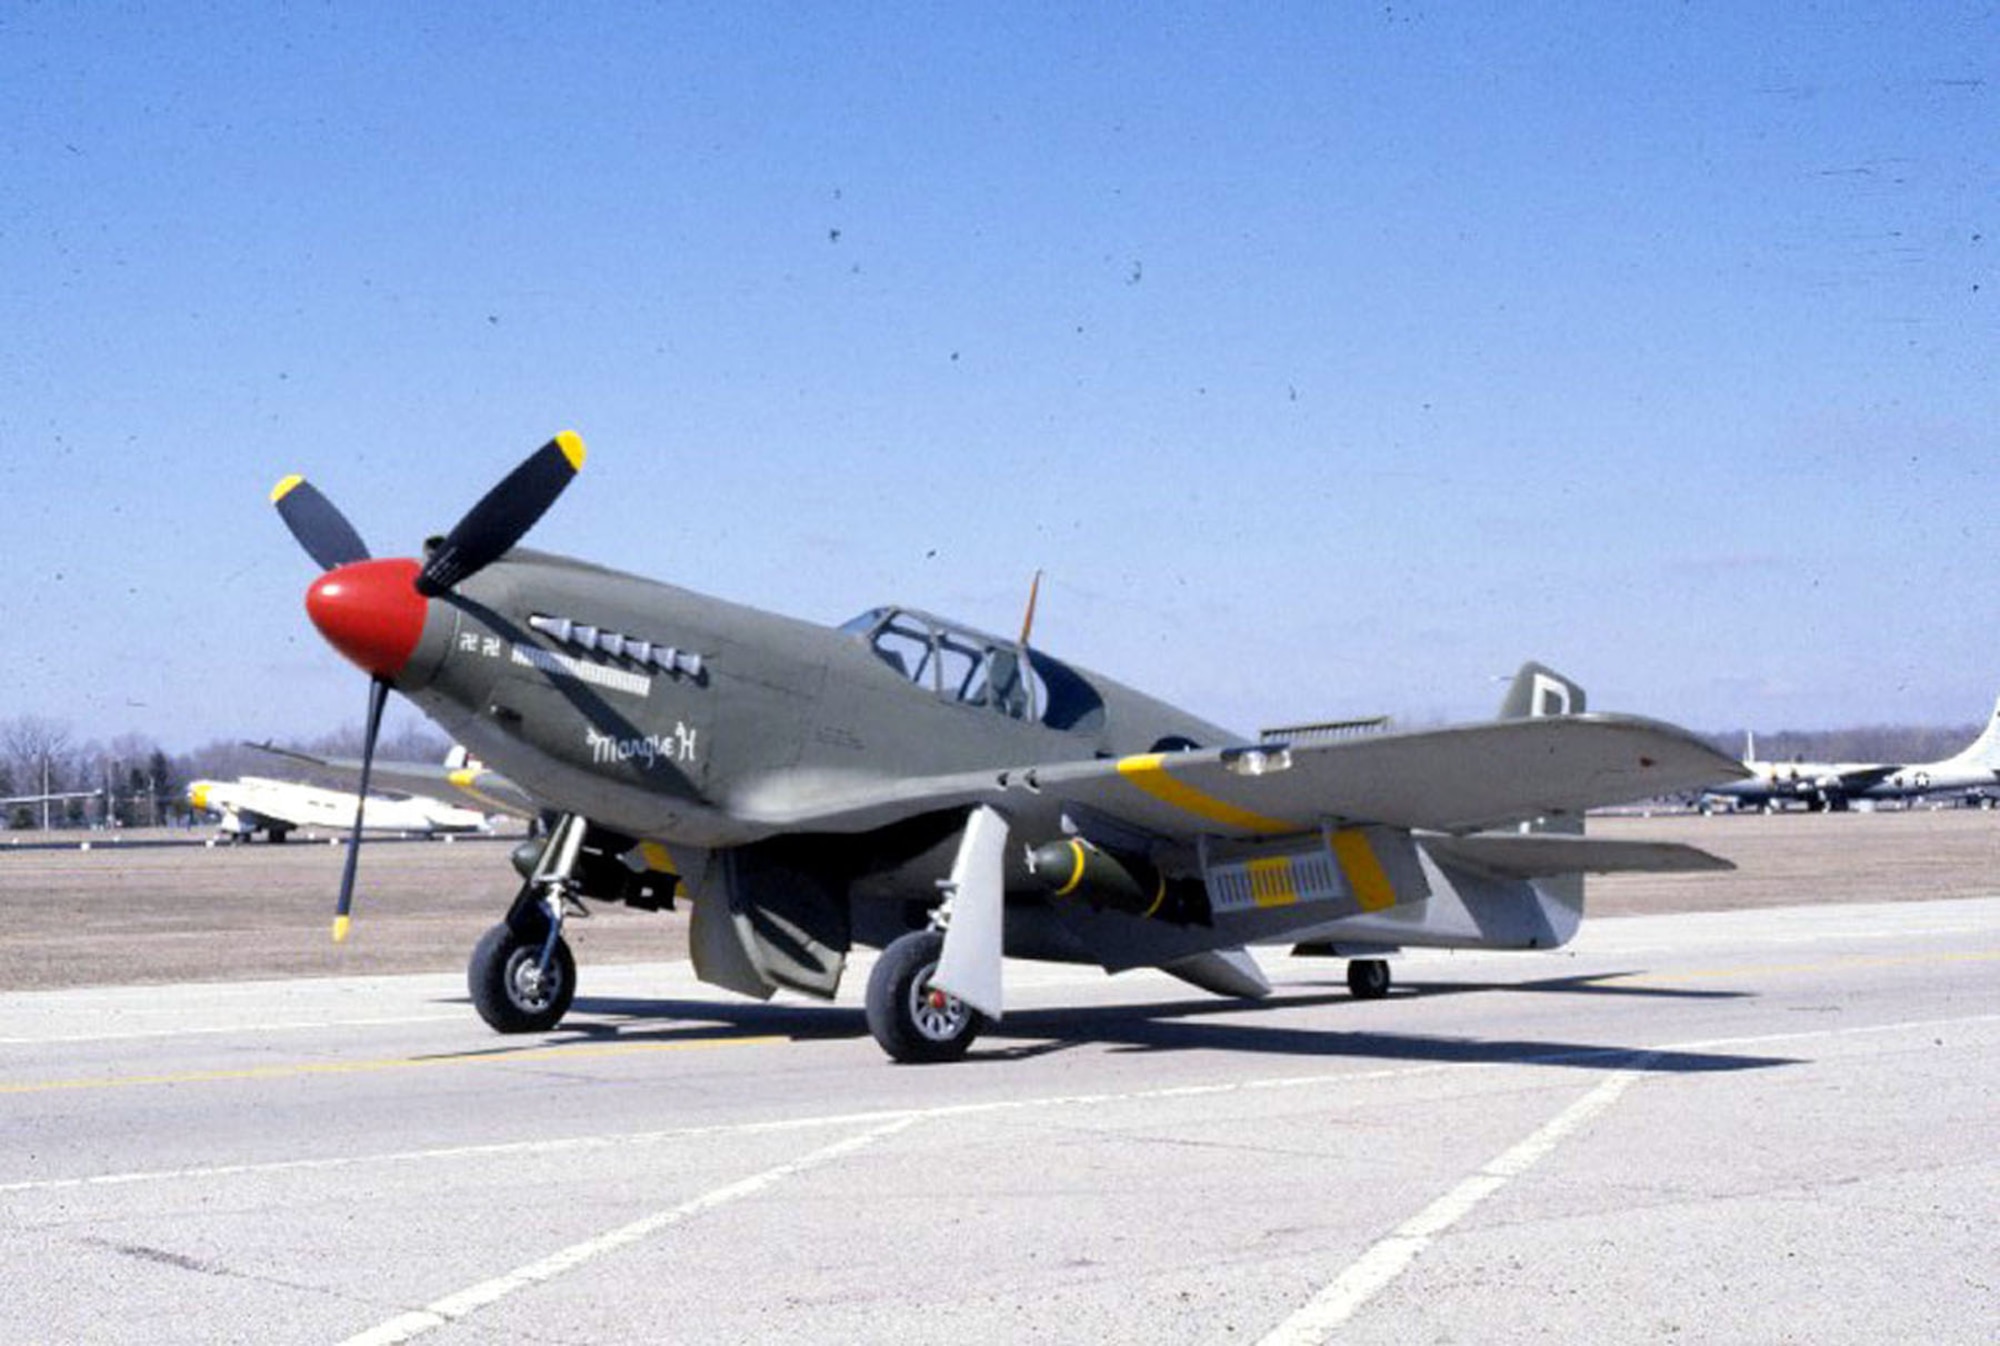 DAYTON, Ohio -- North American A-36A Mustang at the National Museum of the United States Air Force. (U.S. Air Force photo)